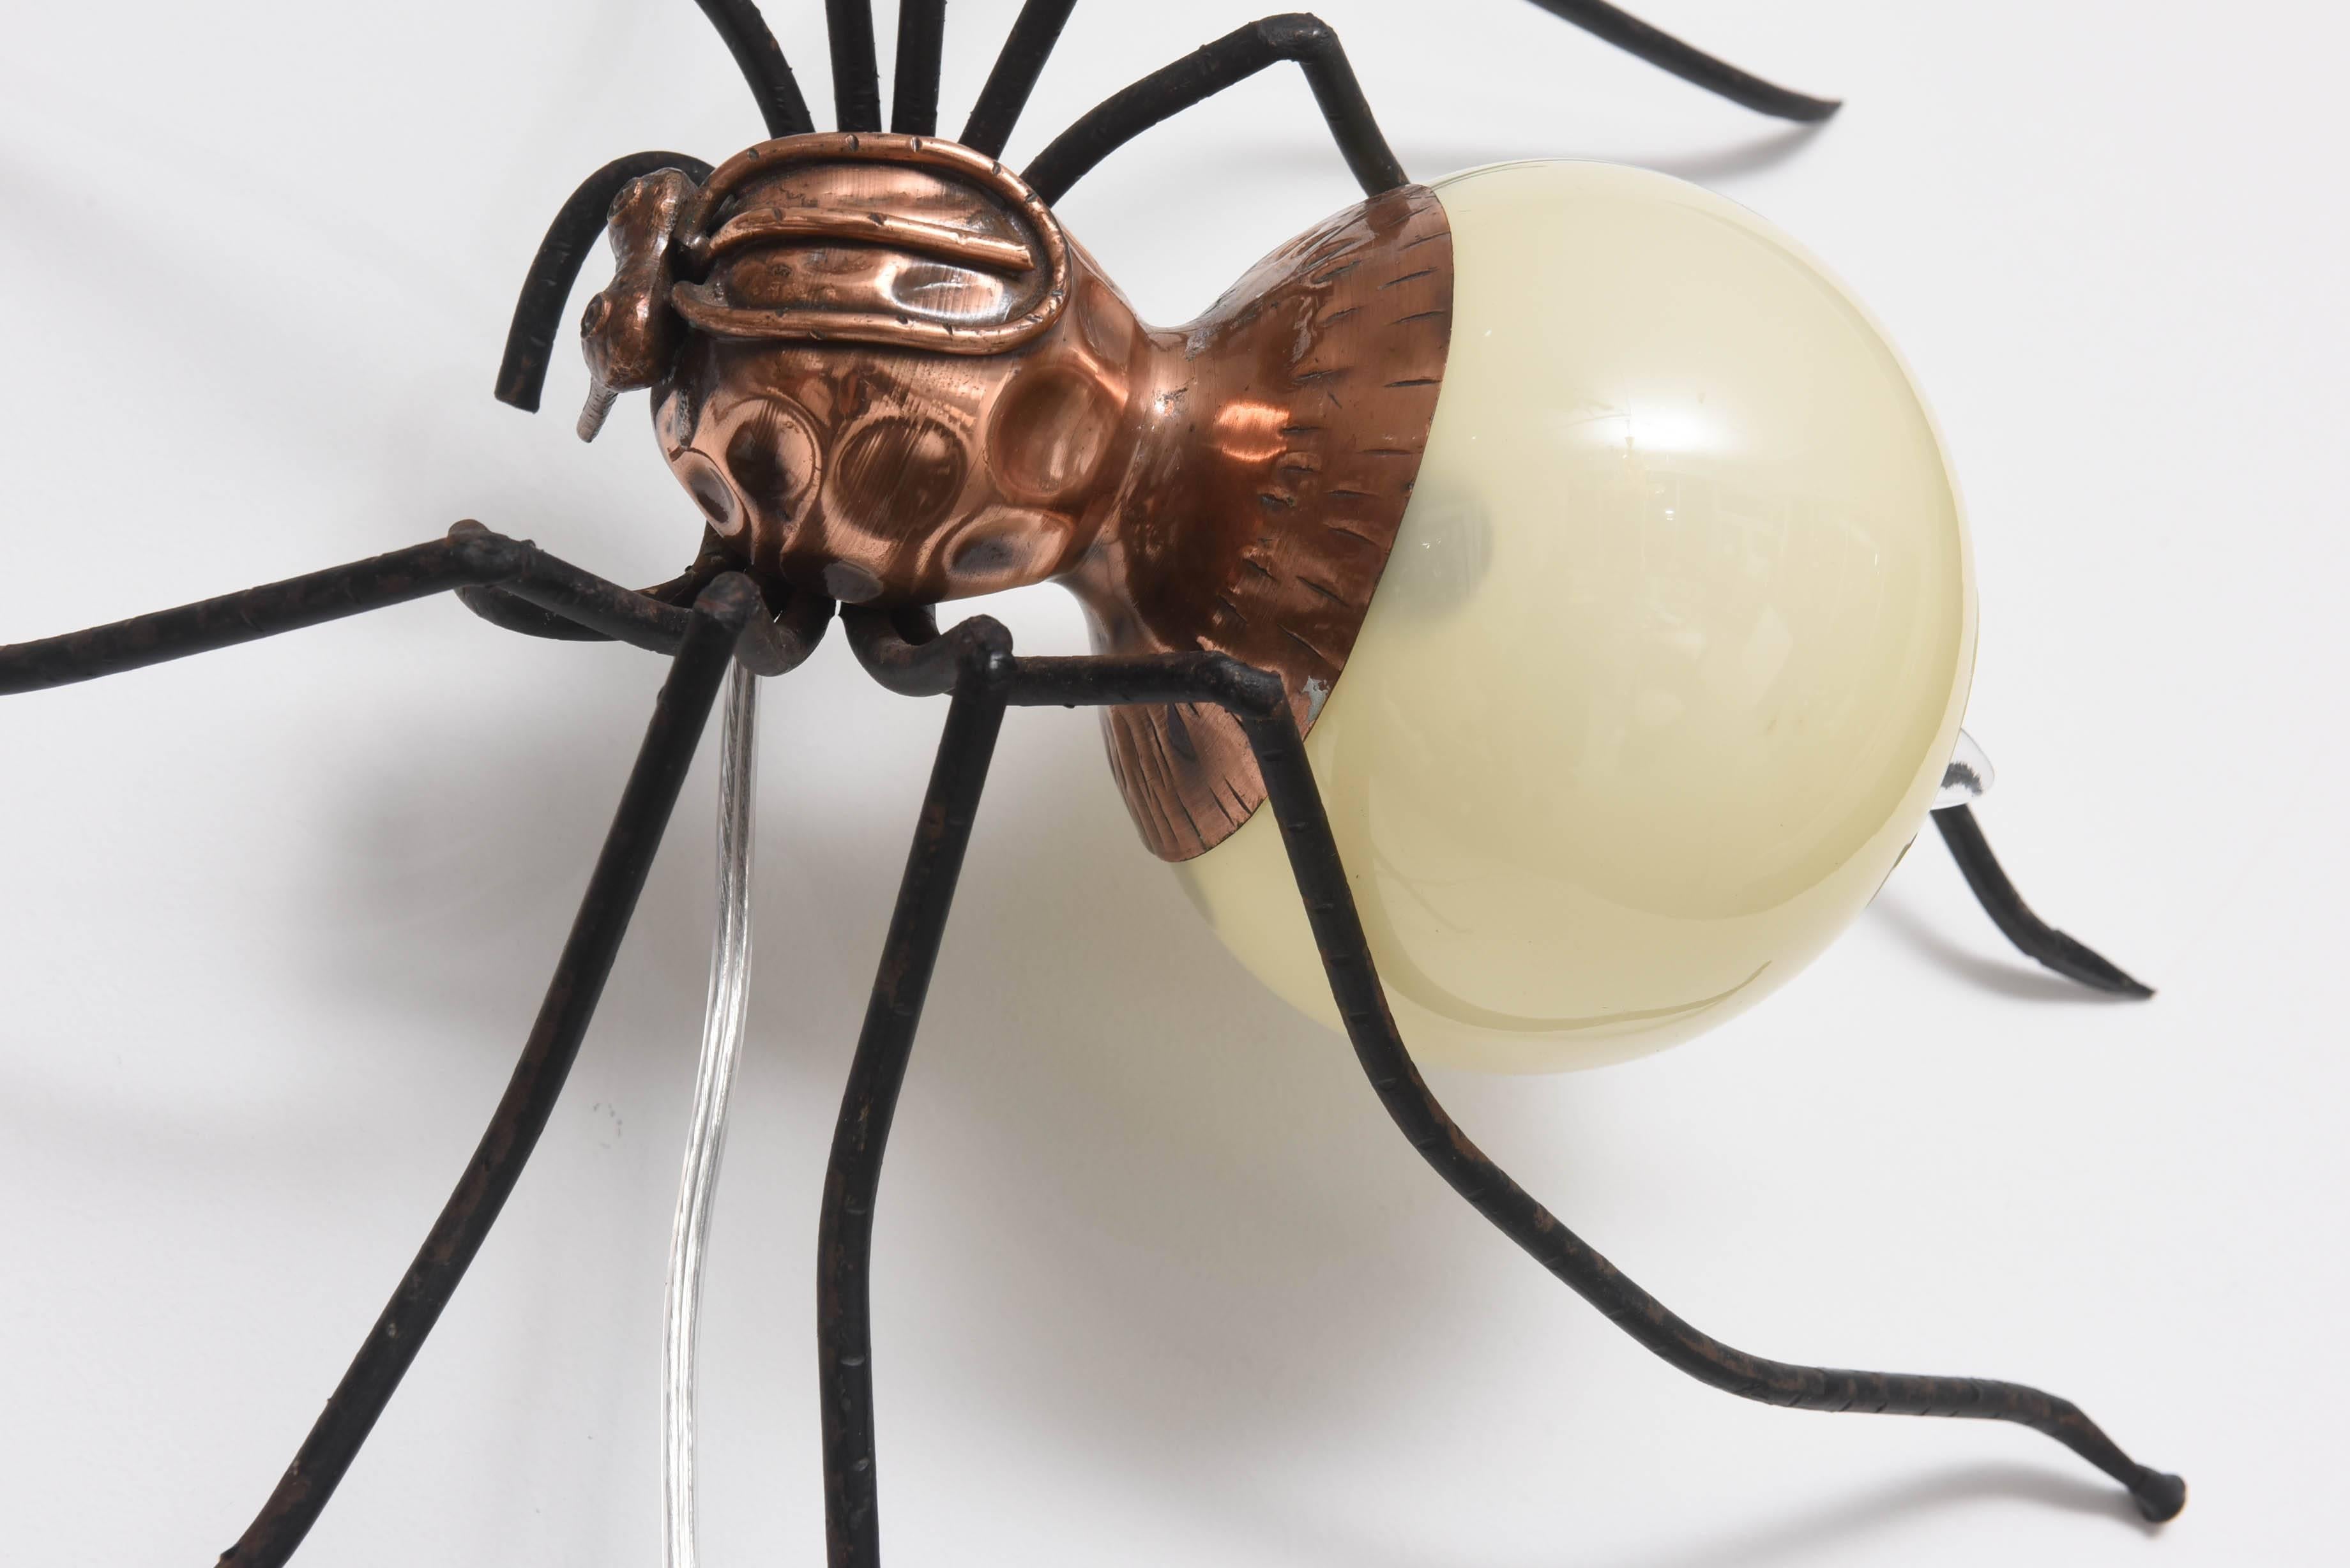 Outsider Art Pr. of Mid-Century Modern Artisan Spider Wall or Table Lamp, Murano Glass & Iron